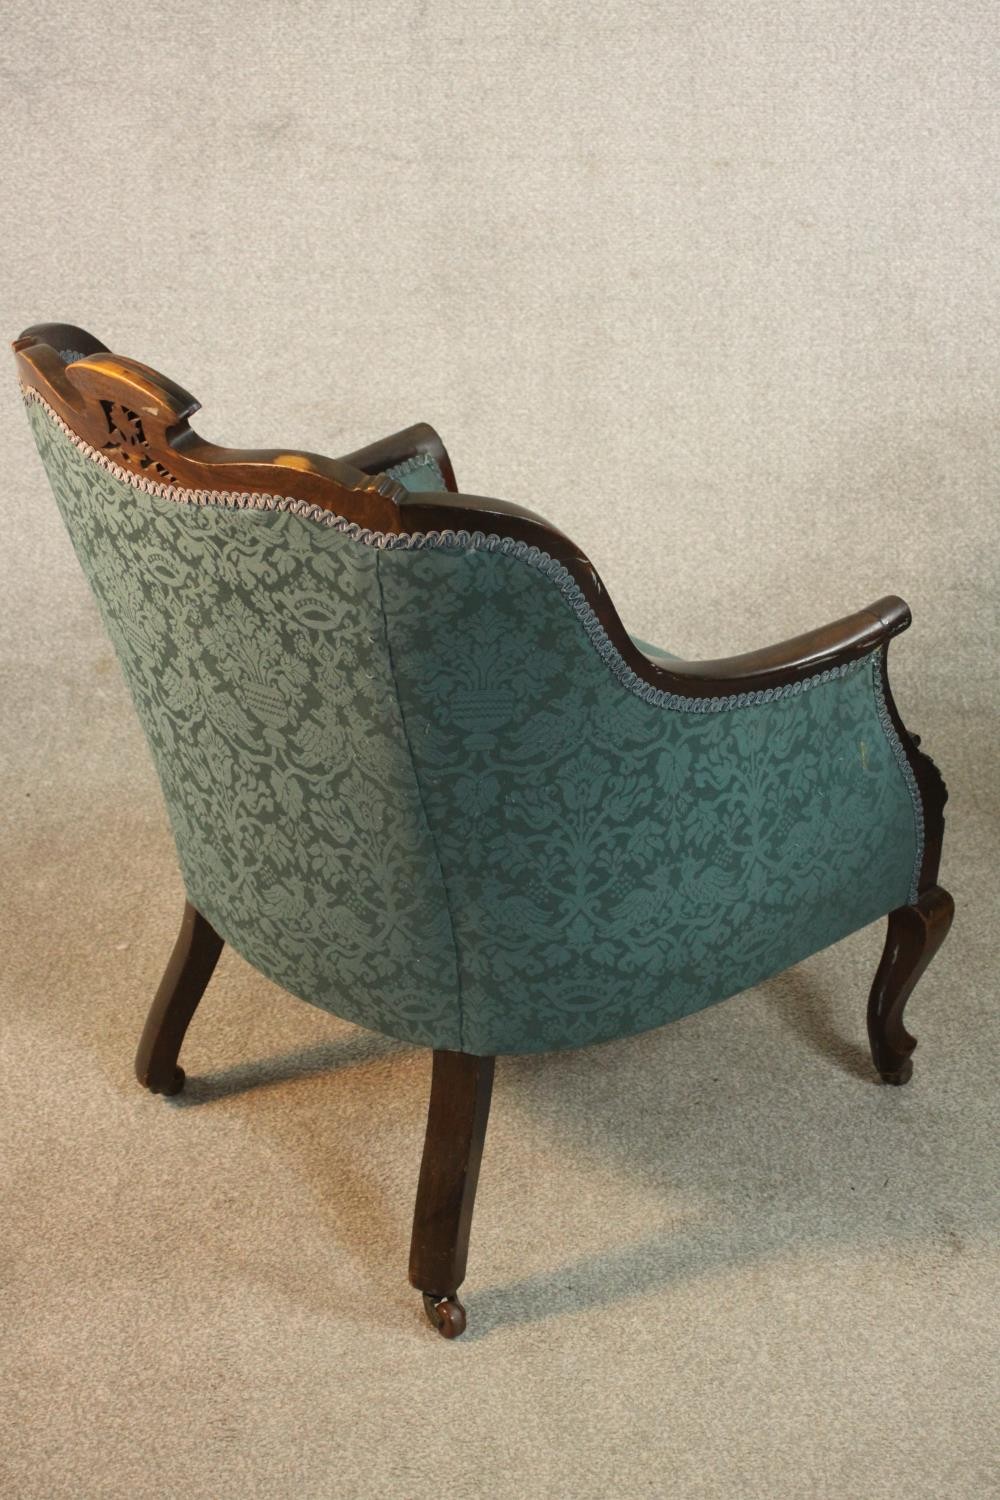 A pair of Edwardian walnut tub armchairs, upholstered in buttoned blue damask, with scrolling arms - Image 7 of 10